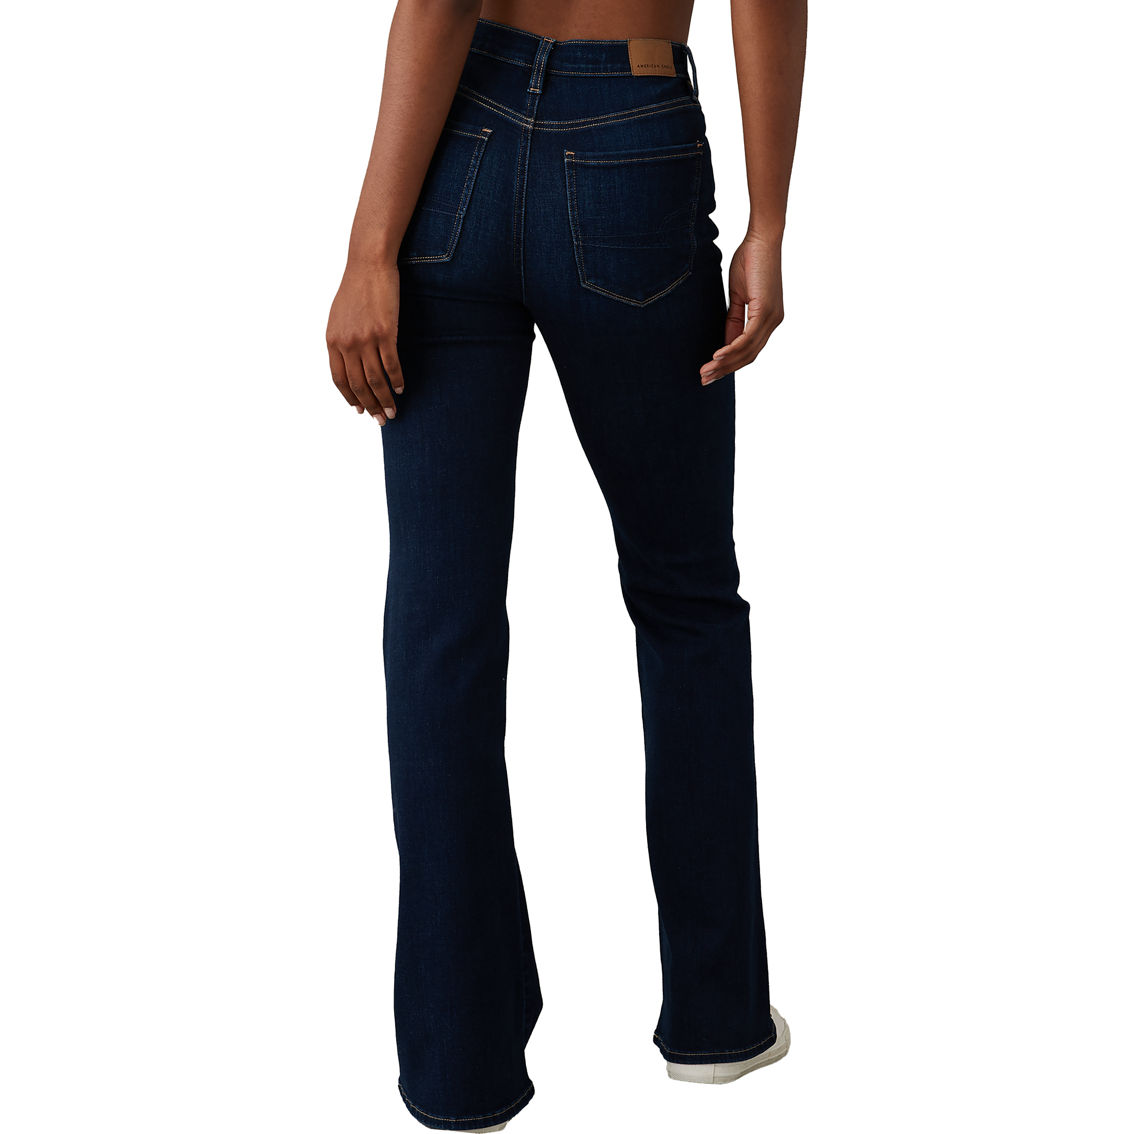 American Eagle Juniors Next Level Super High Waisted Flare Jeans - Image 2 of 5